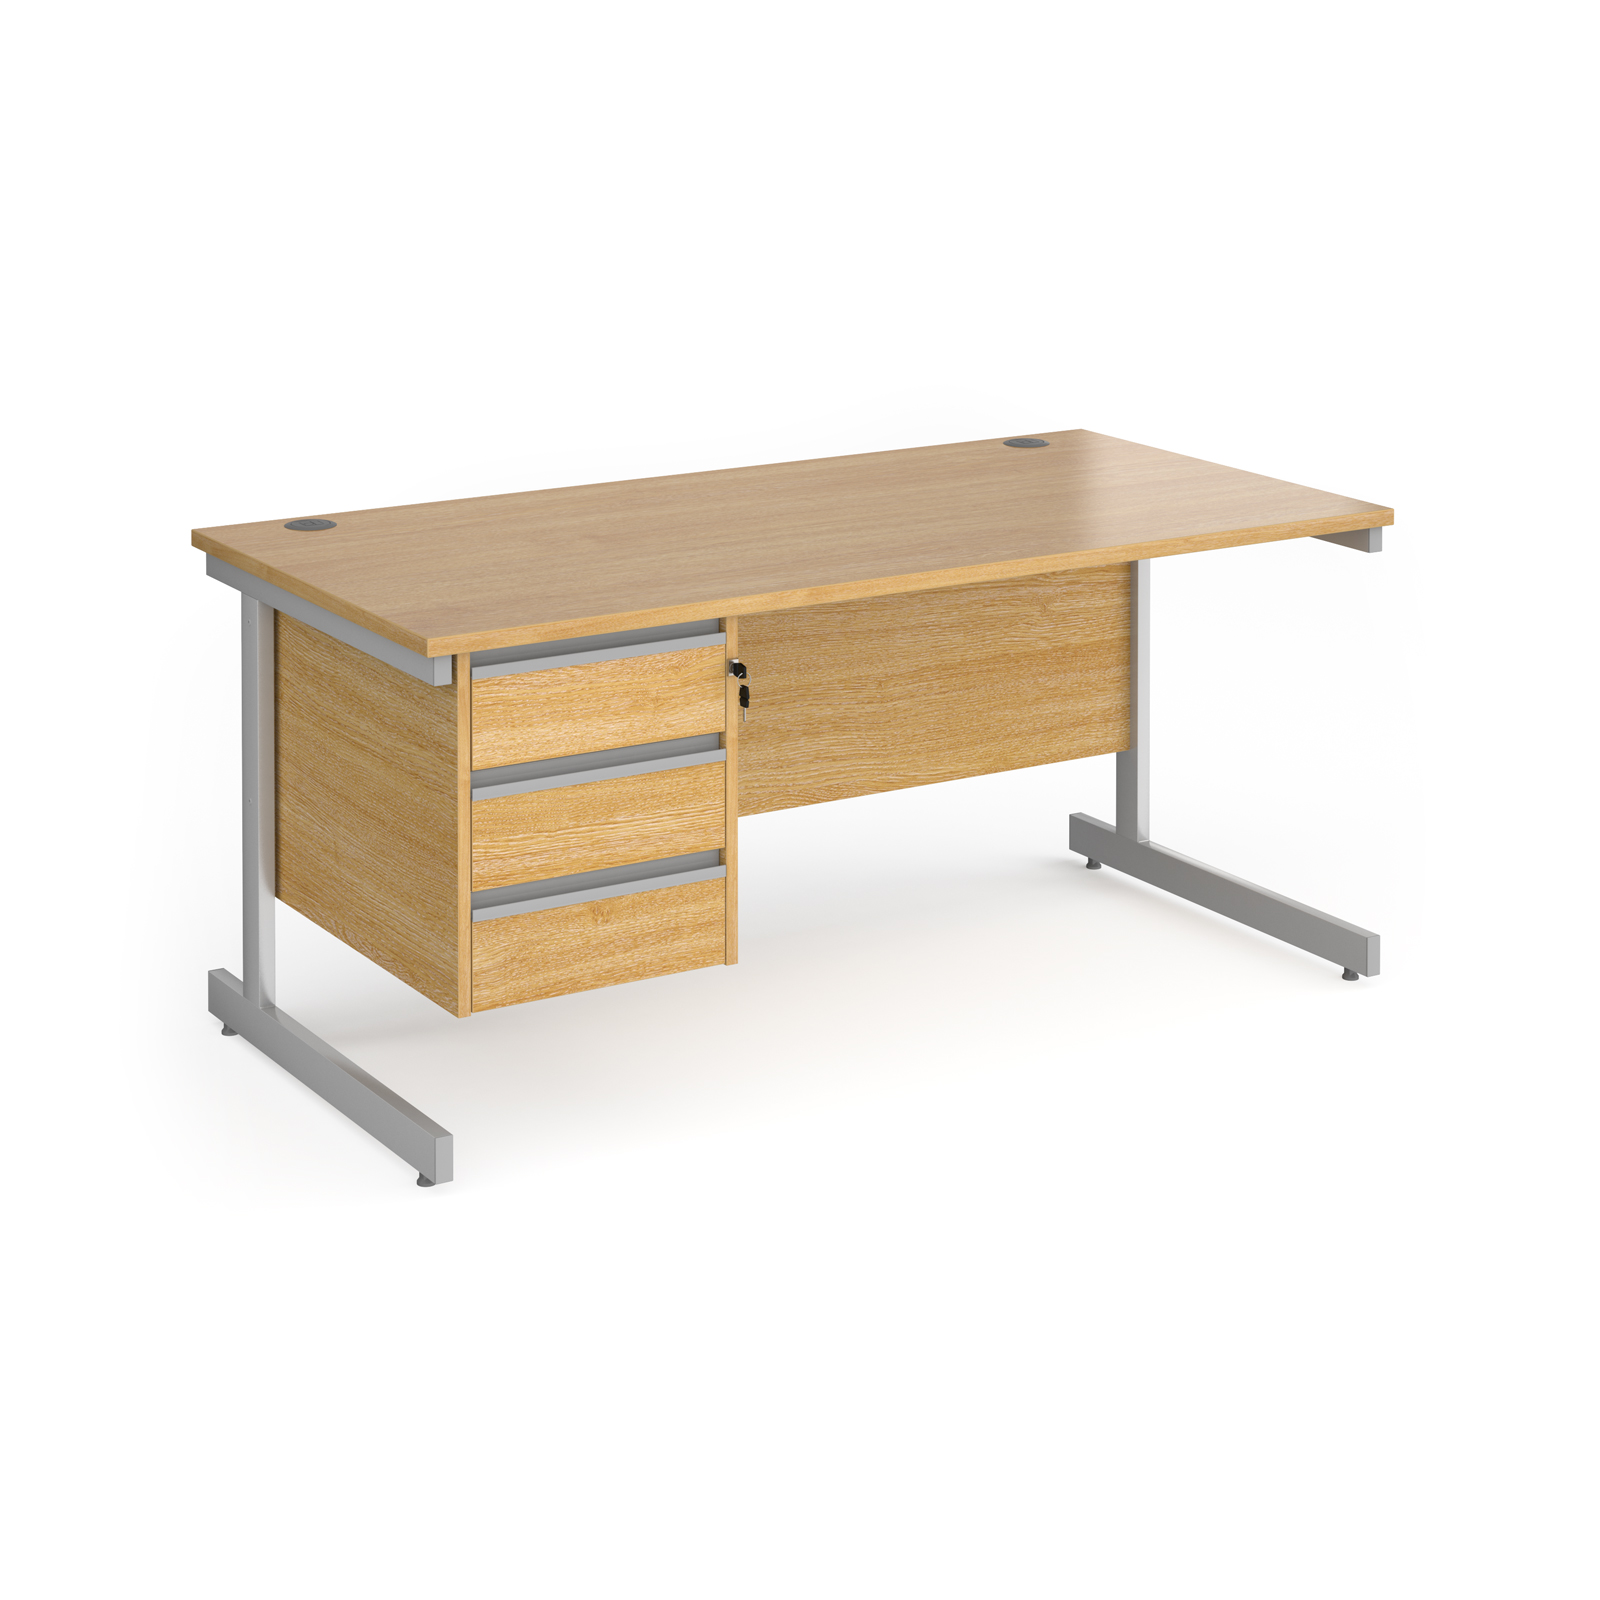 Contract 25 cantilever leg straight desk with 3 drawer pedestal